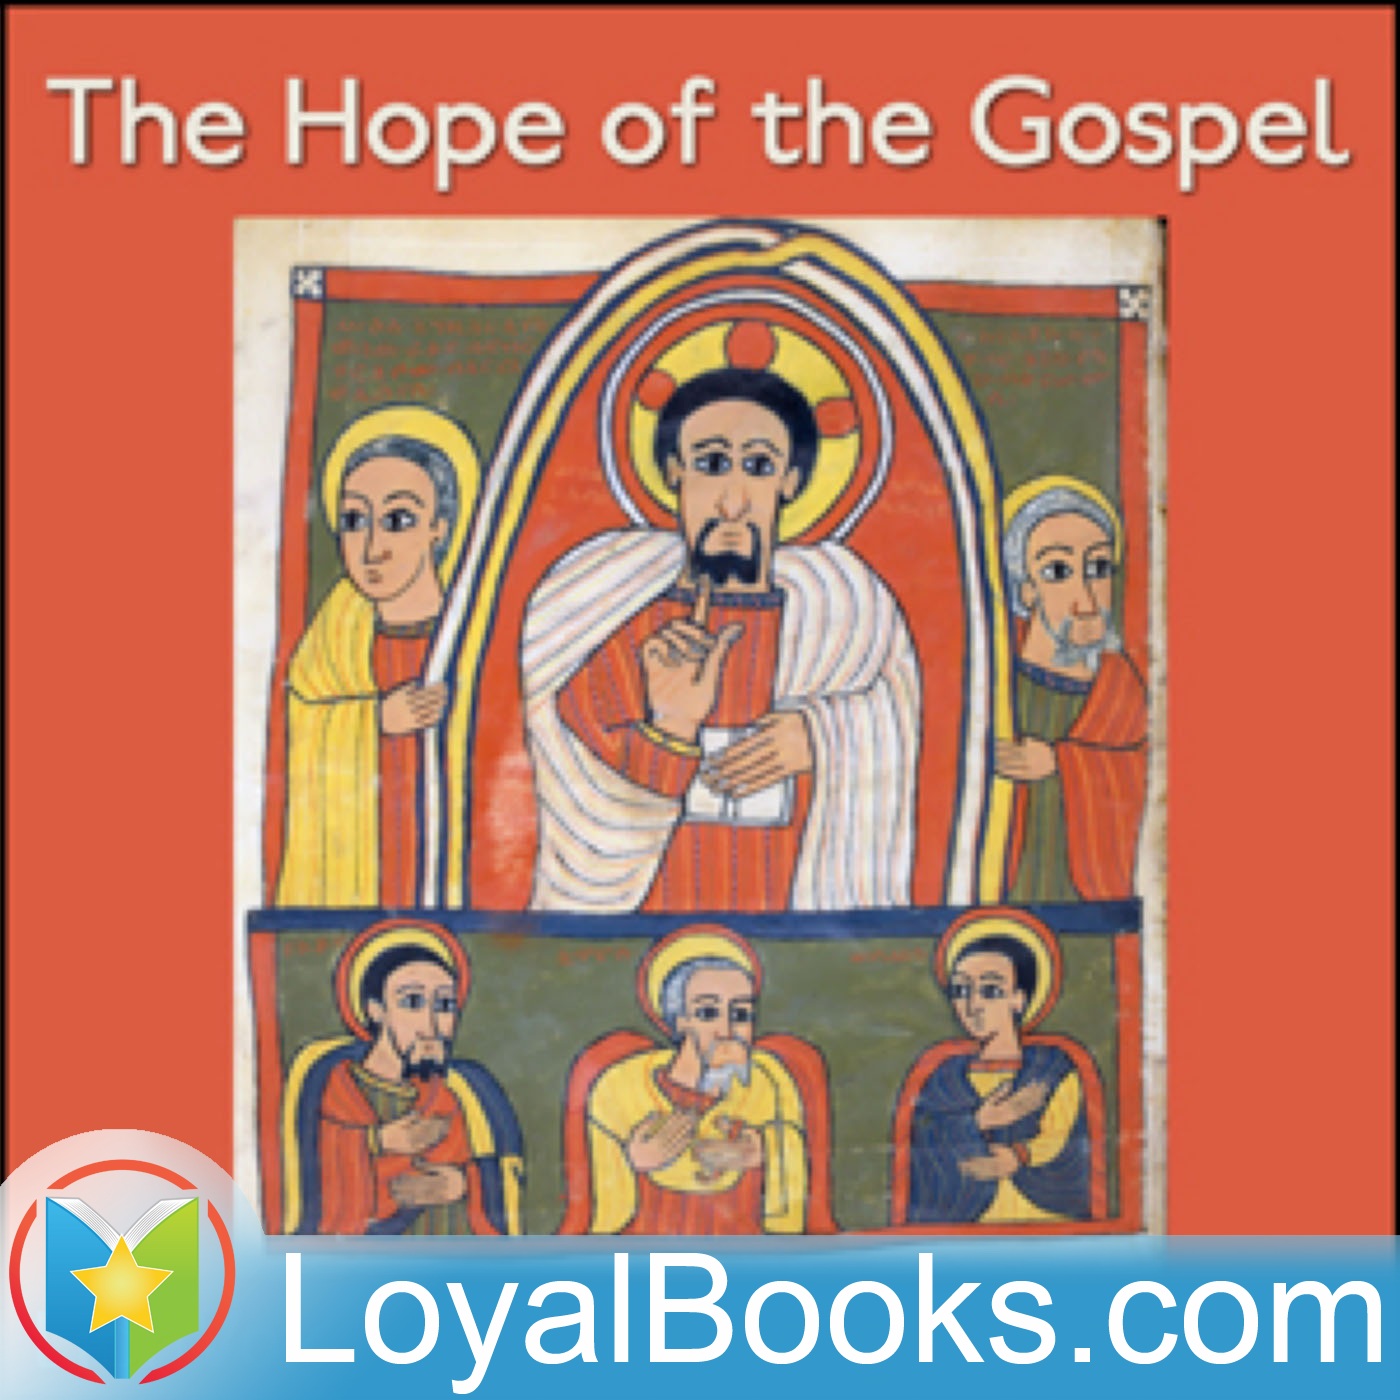 The Hope of the Gospel by George MacDonald